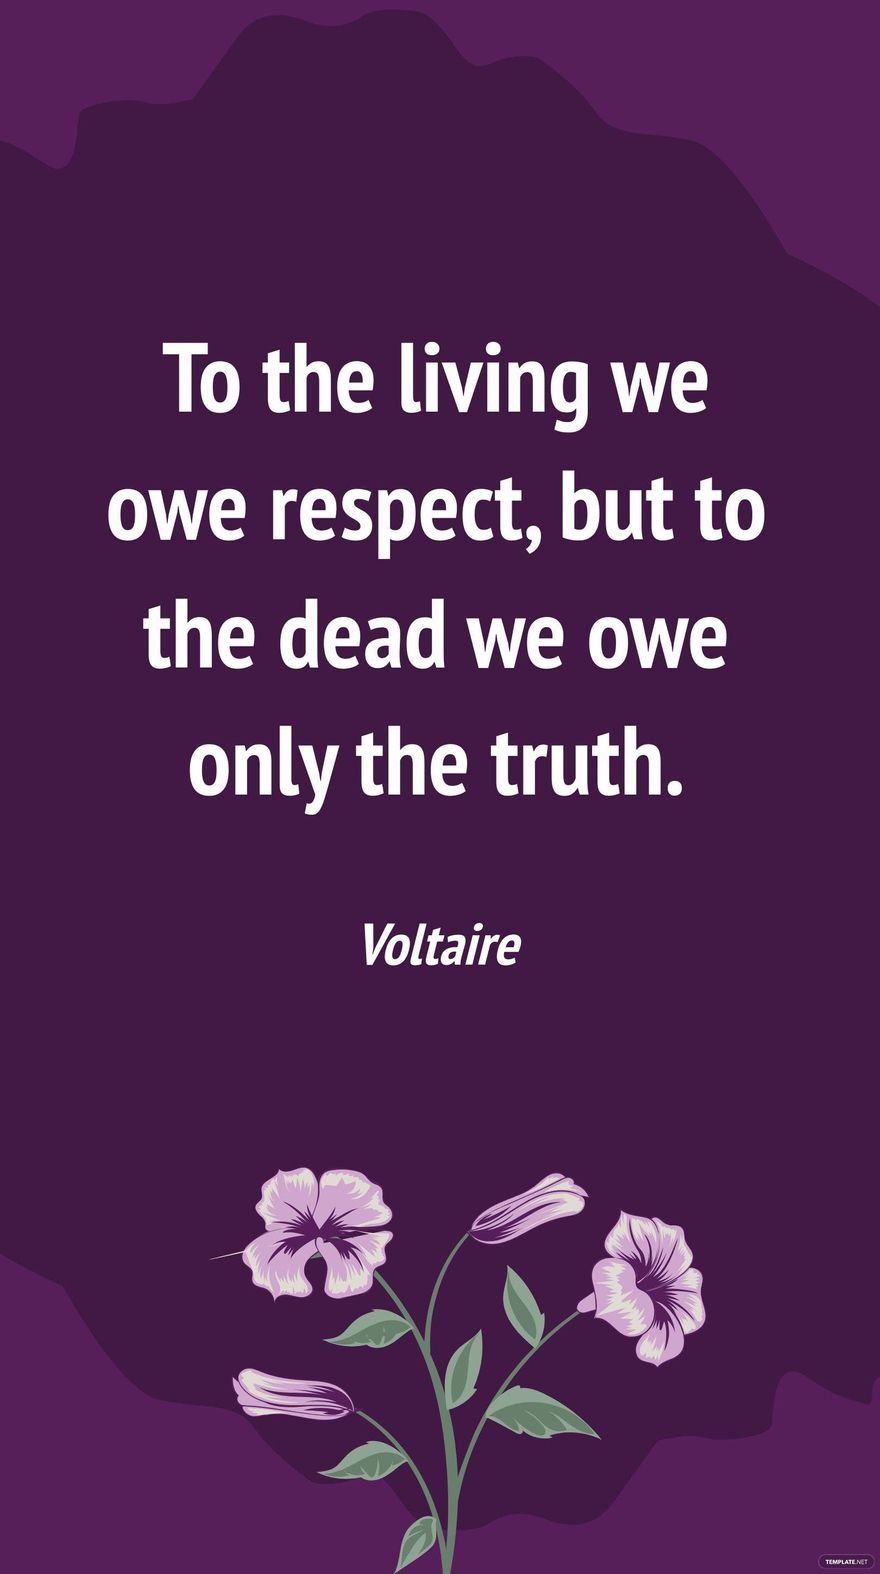 Free Voltaire - To the living we owe respect, but to the dead we owe only the truth. in JPG